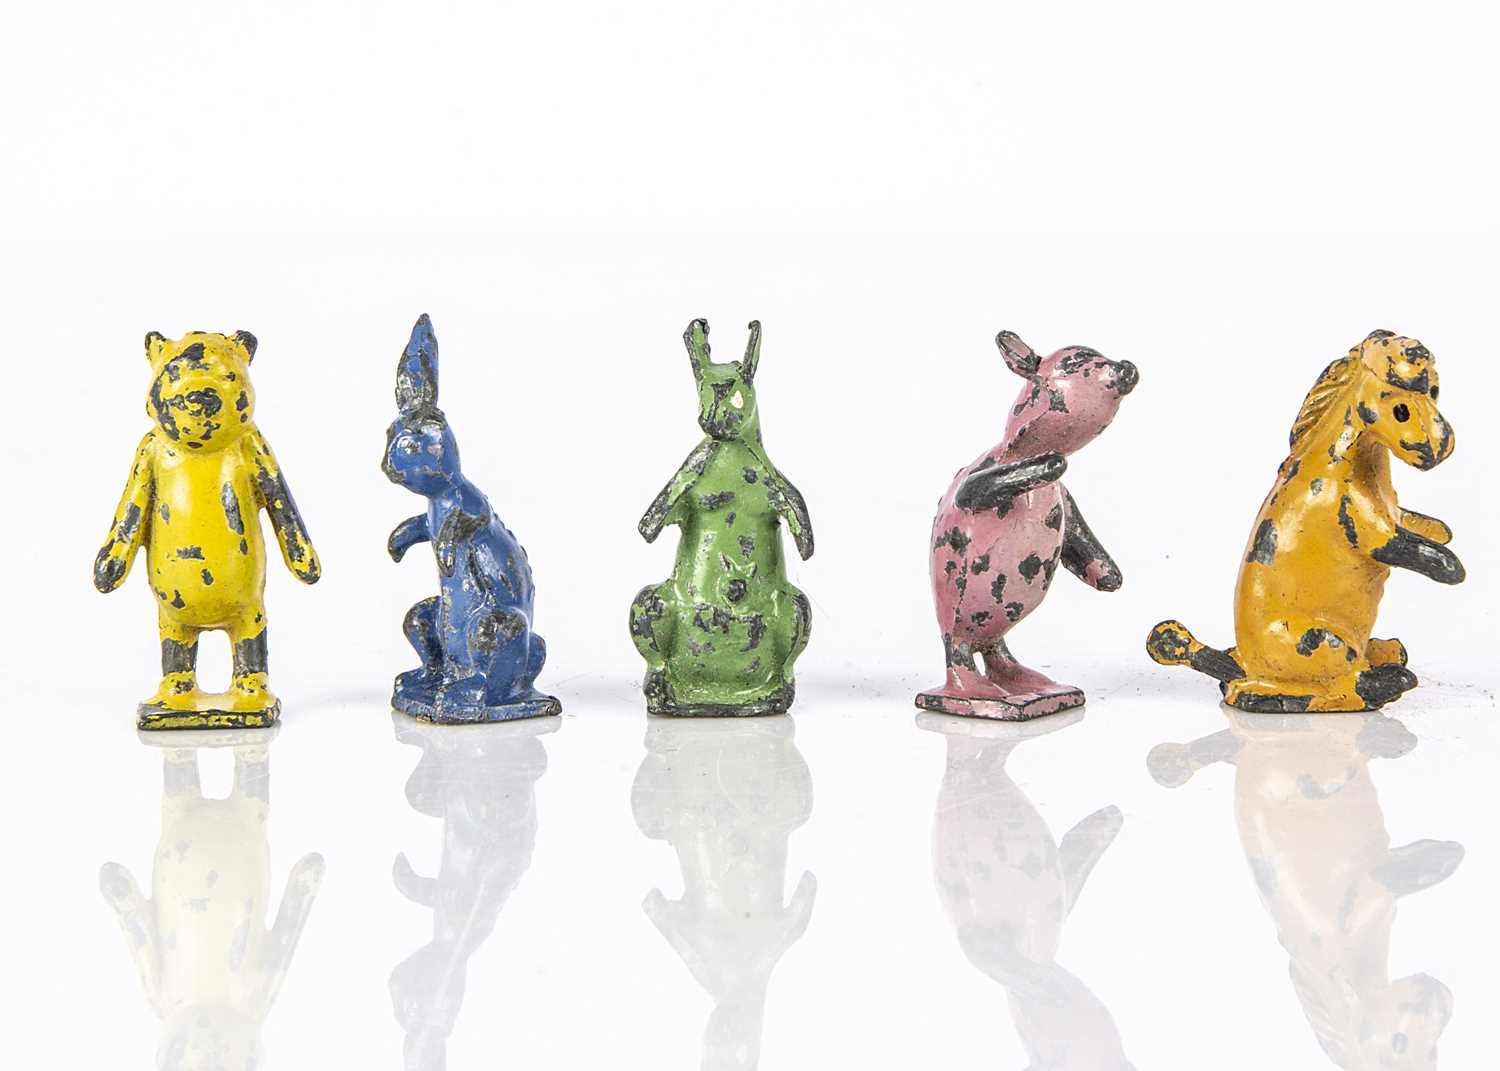 Lot 101 - Pixyland-Kew A A Milne and E H Shepherd’s Winnie the Pooh and friends